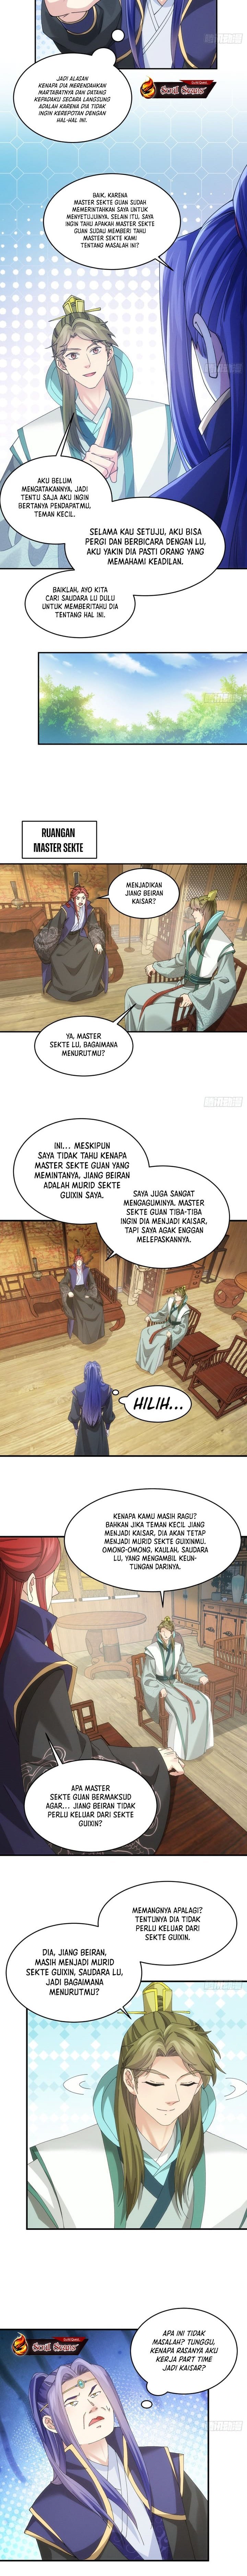 Dilarang COPAS - situs resmi www.mangacanblog.com - Komik i just dont play the card according to the routine 150 - chapter 150 151 Indonesia i just dont play the card according to the routine 150 - chapter 150 Terbaru 4|Baca Manga Komik Indonesia|Mangacan